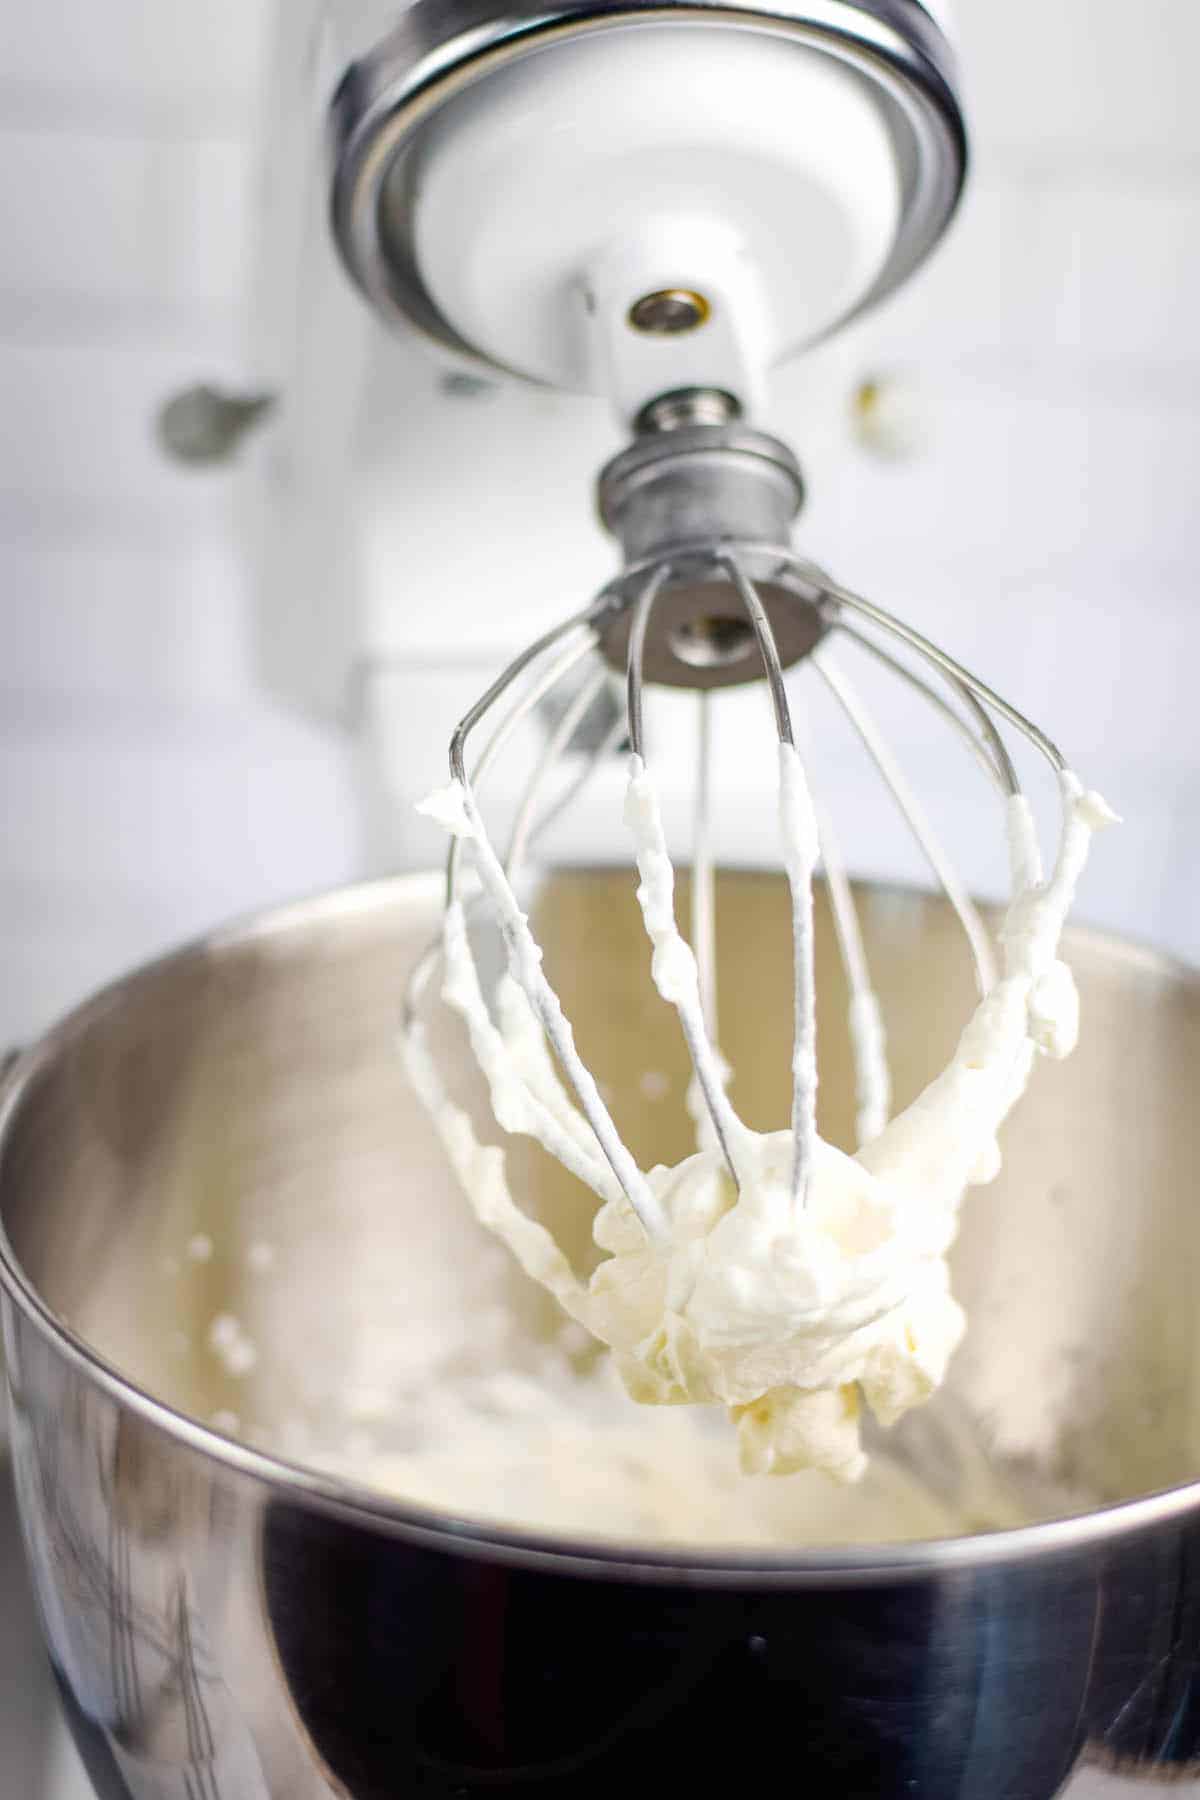 stand mixer with the whisk attachment and homemade maple whipped cream on the whisk